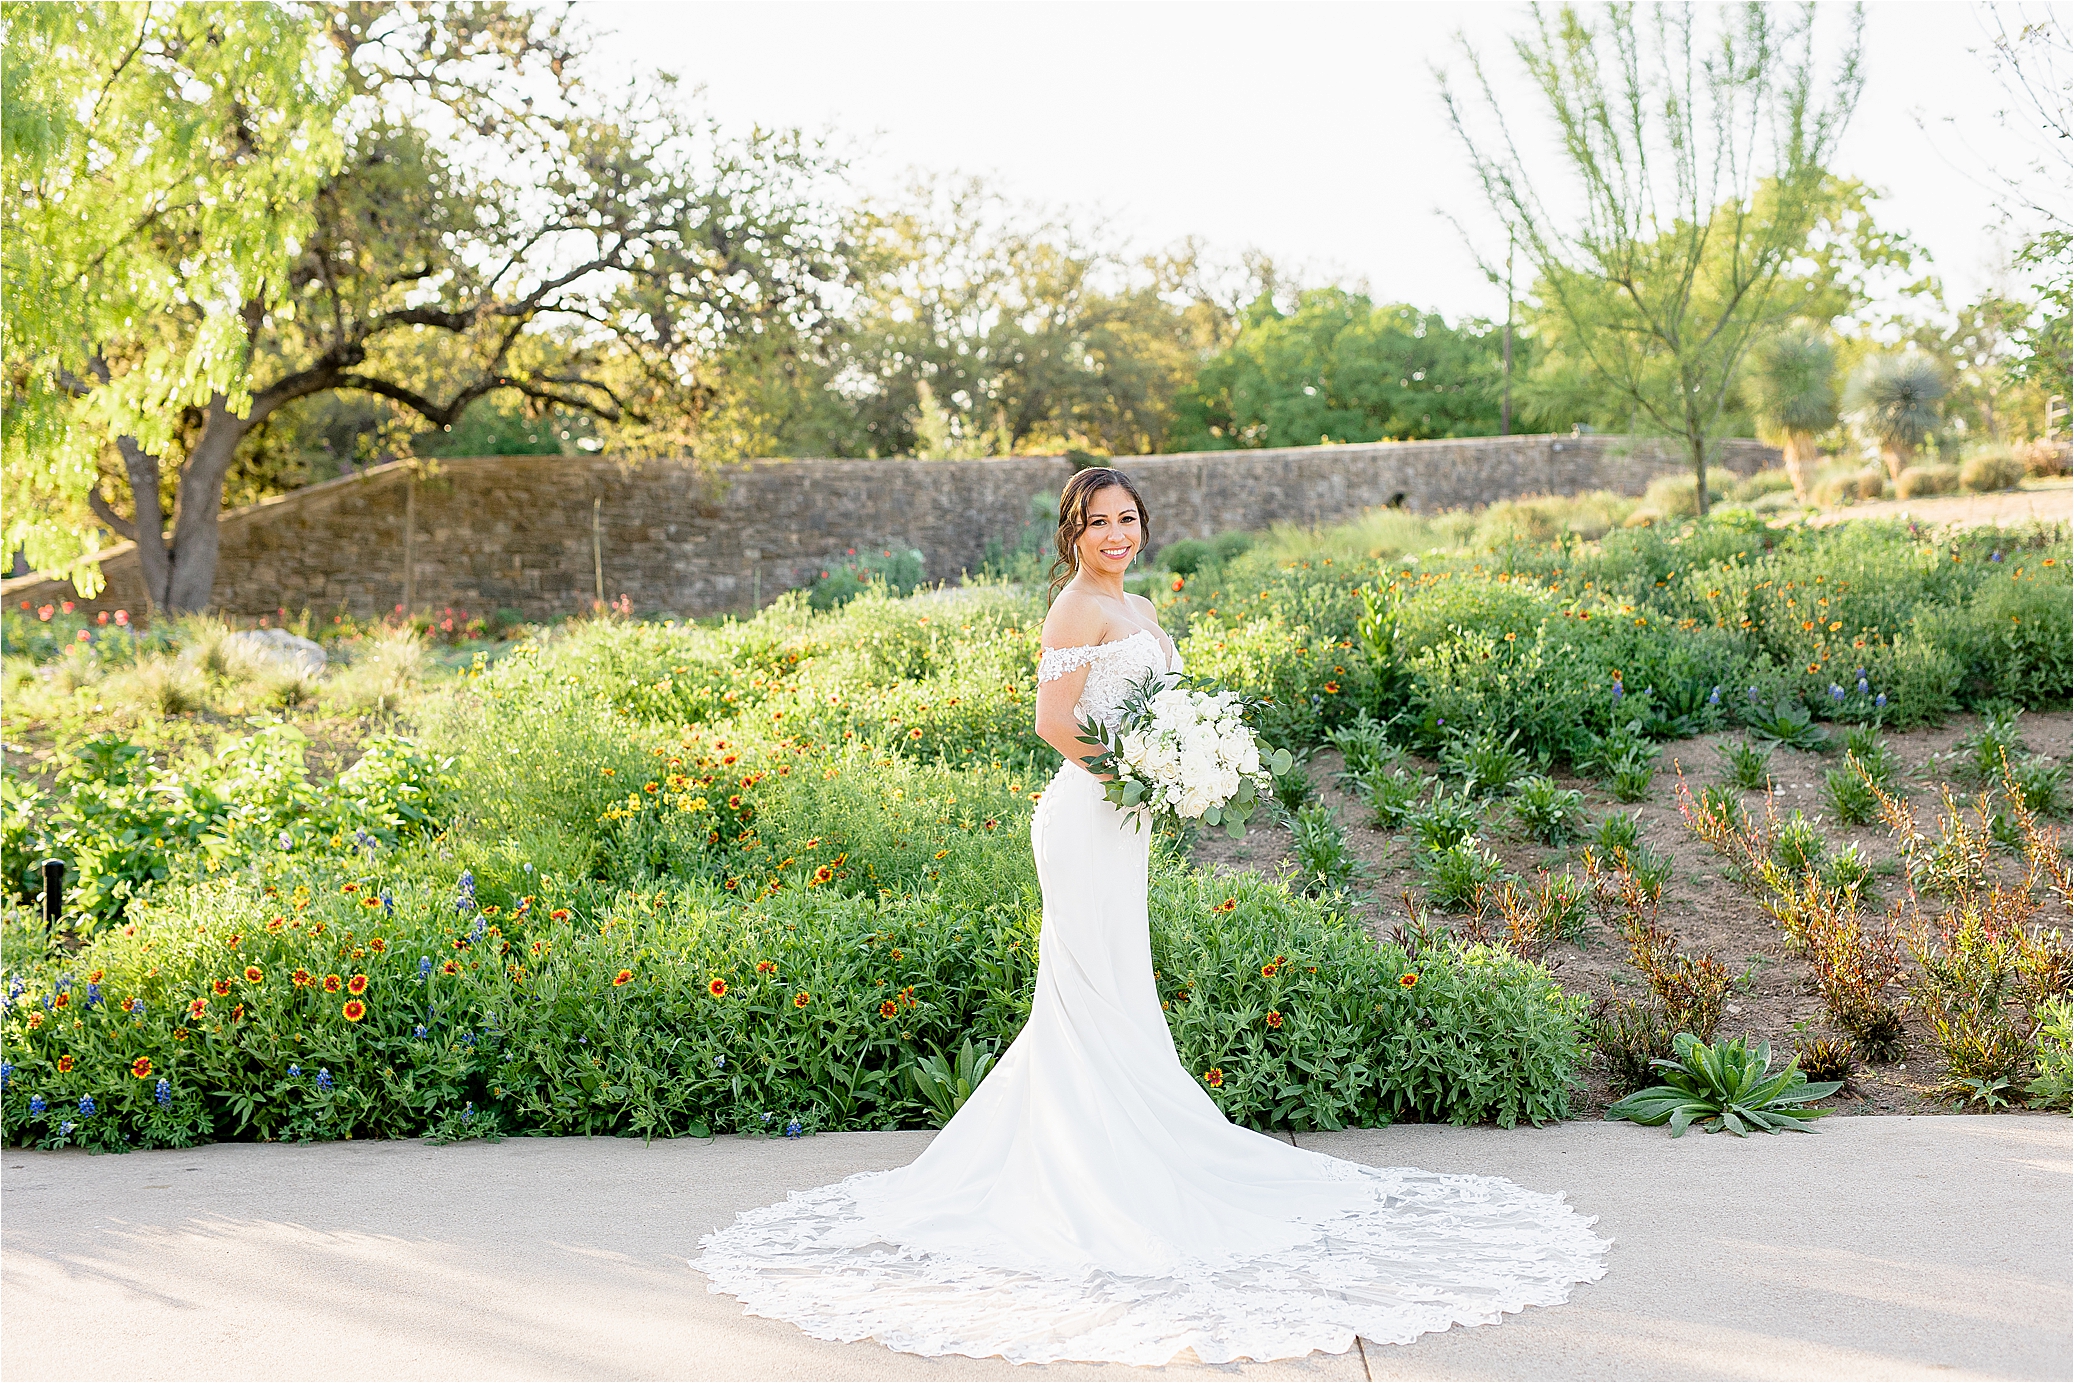 A bride smiles surrounded by flowers and greenery at San Antonio Botanic Garden during her Spring Bridal Portraits 